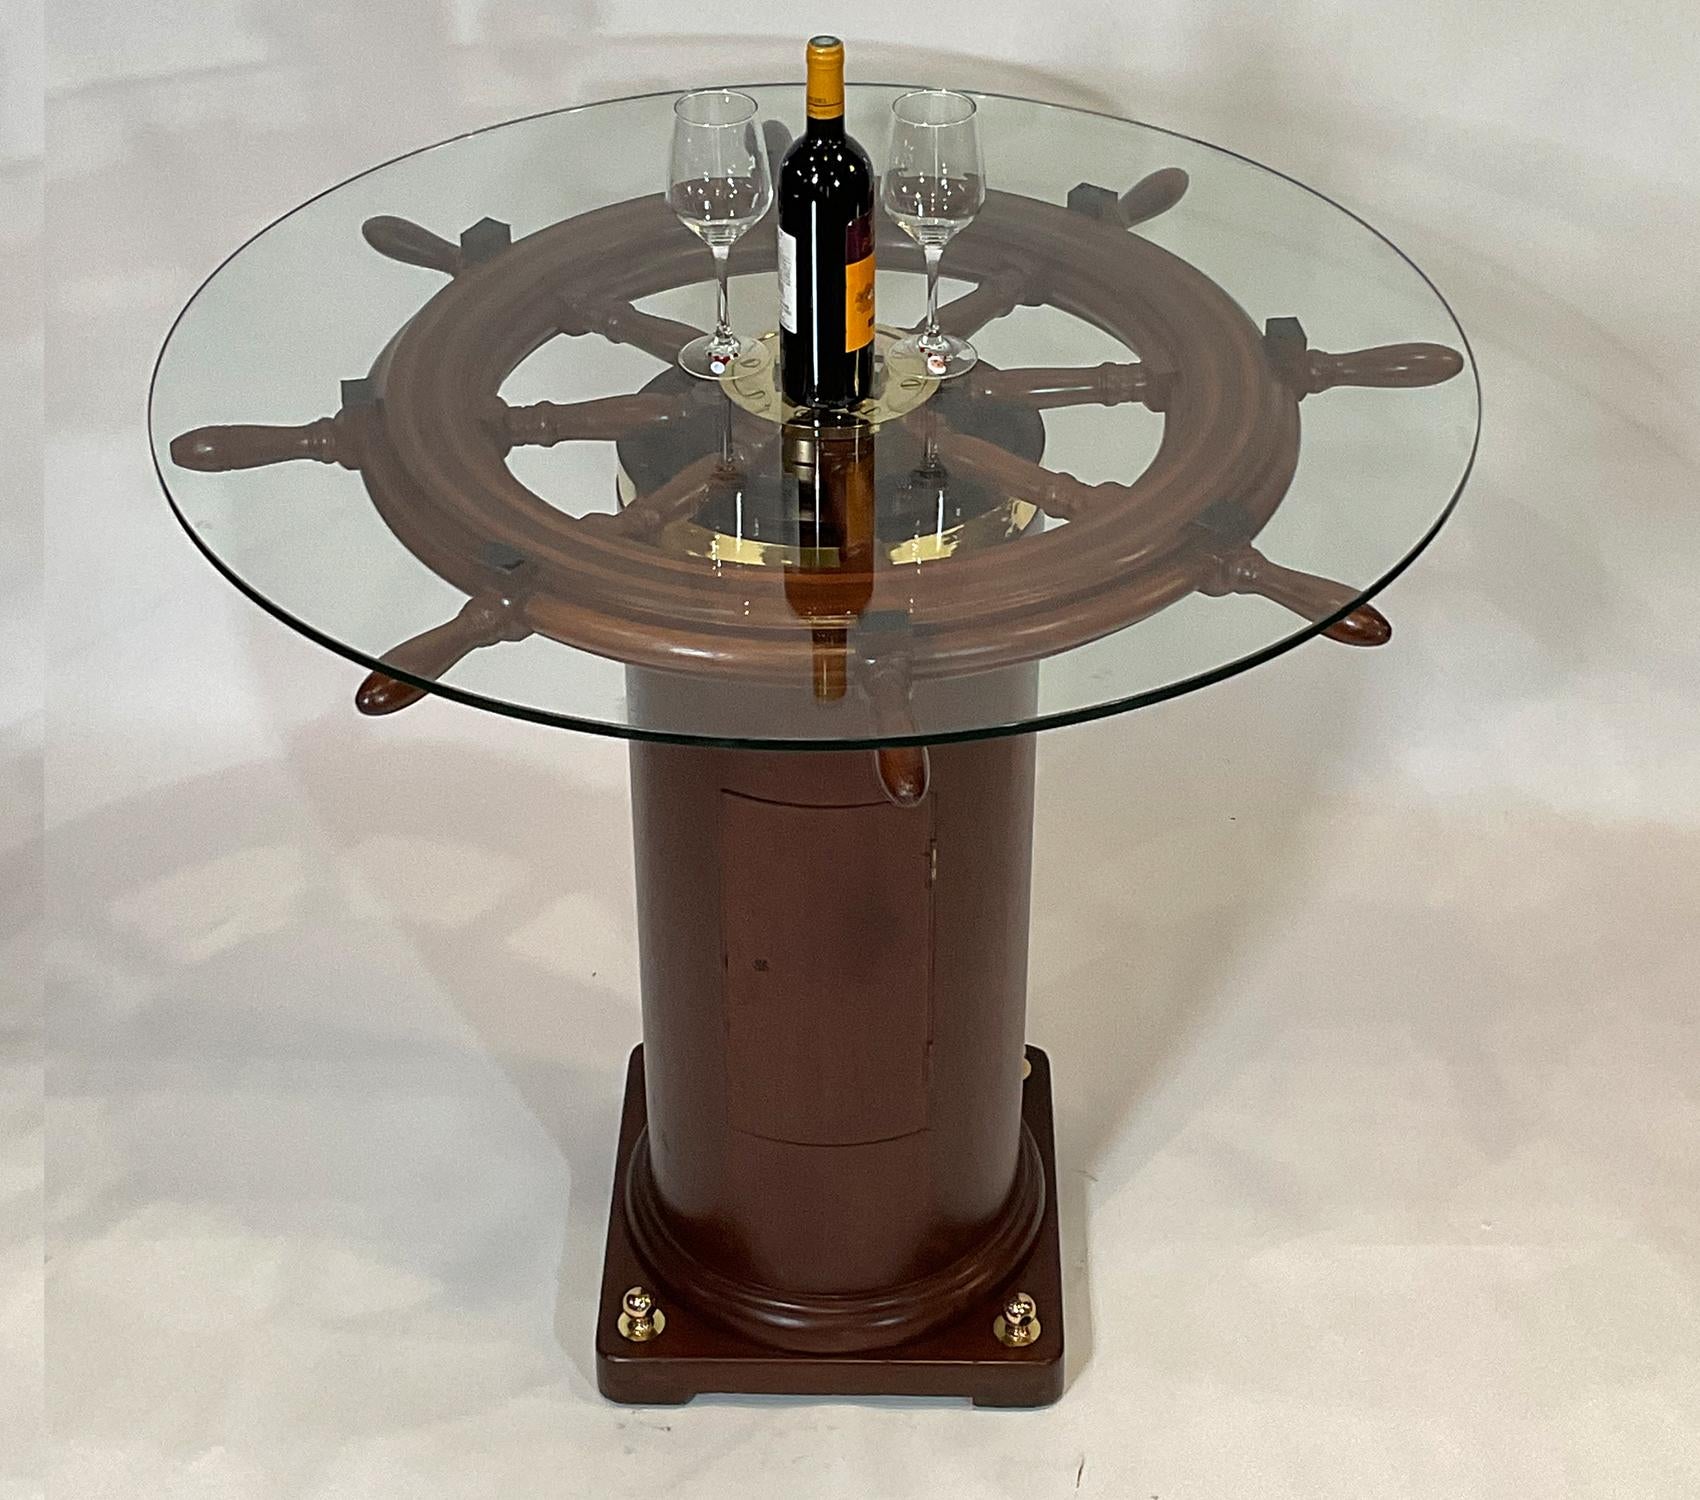 Quality eight spoke varnished ships wheel that is mounted to an authentic ships binnacle base. Both have been professionally sanded, stained, and refinished. The result is extraordinary. The brass hub has been meticulously polished and lacquered.